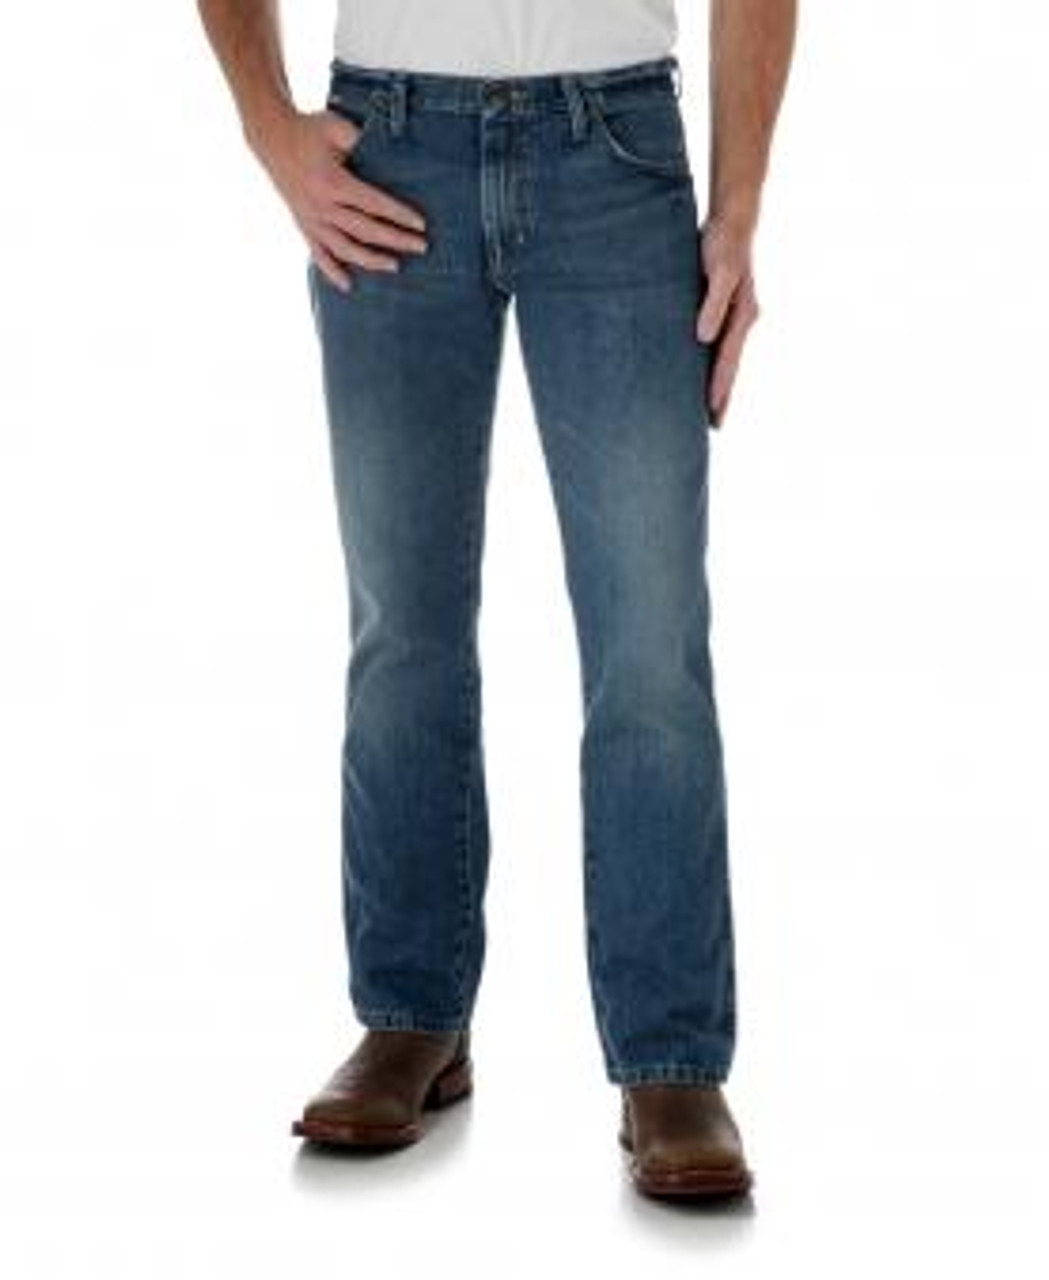 slim fit jeans and boots